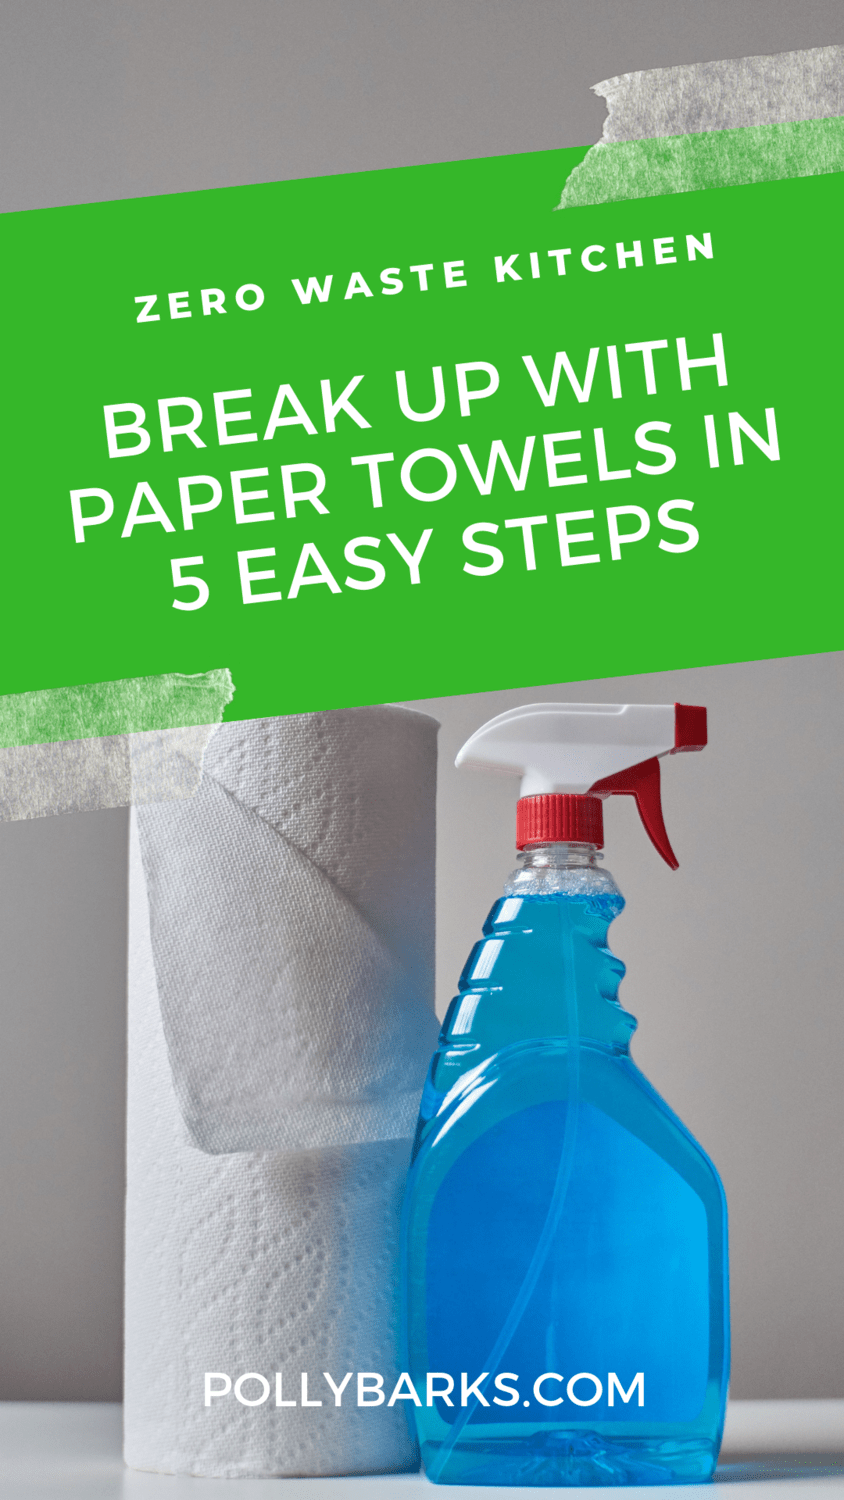 Break up with paper towels in 5 easy steps — Polly Barks